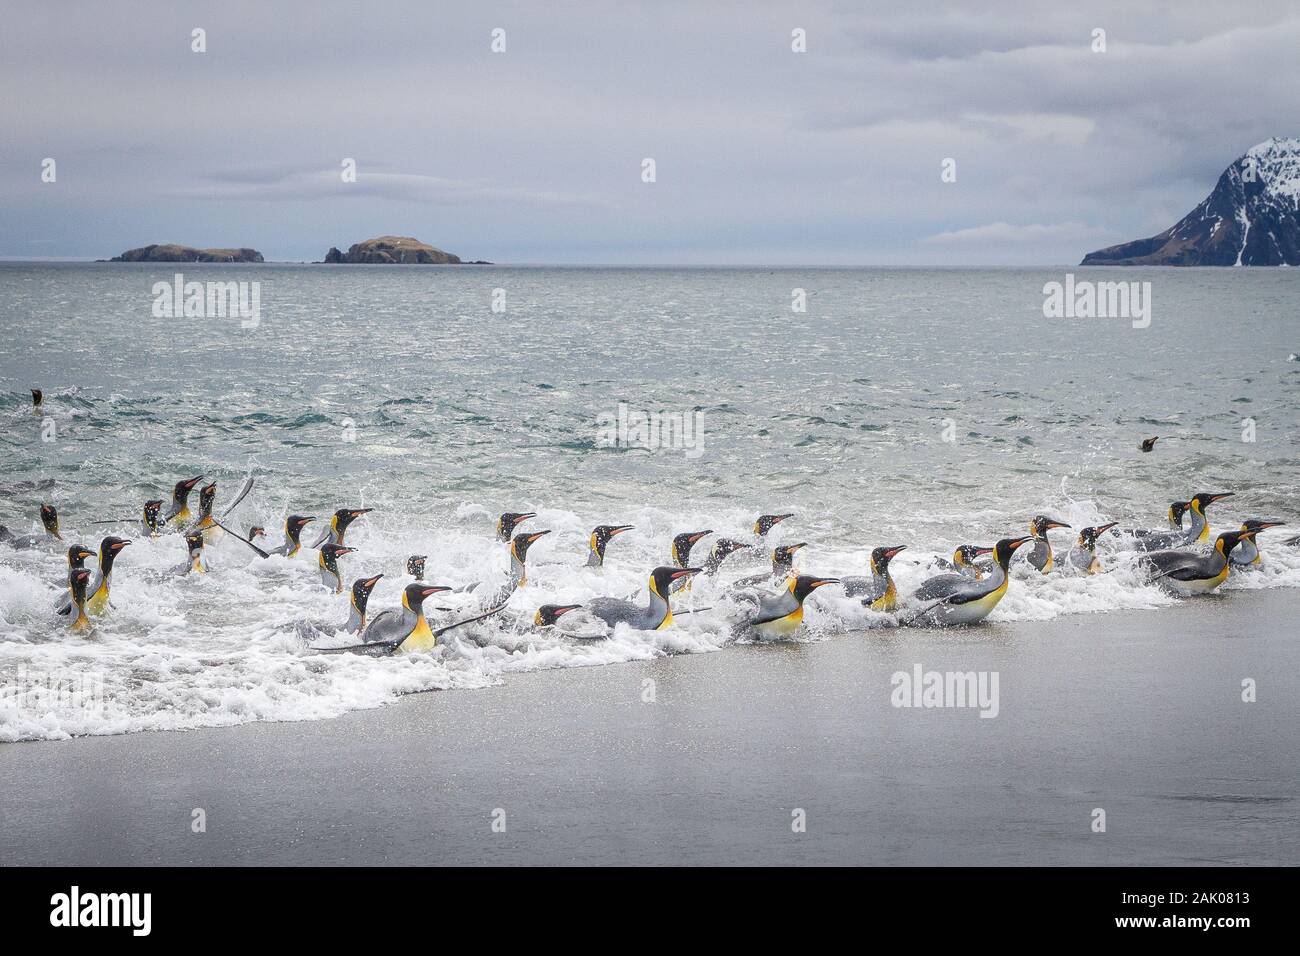 King Penguins returning from the sea in the surf, Salisbury Plain, South Georgia, Antarctica Stock Photo